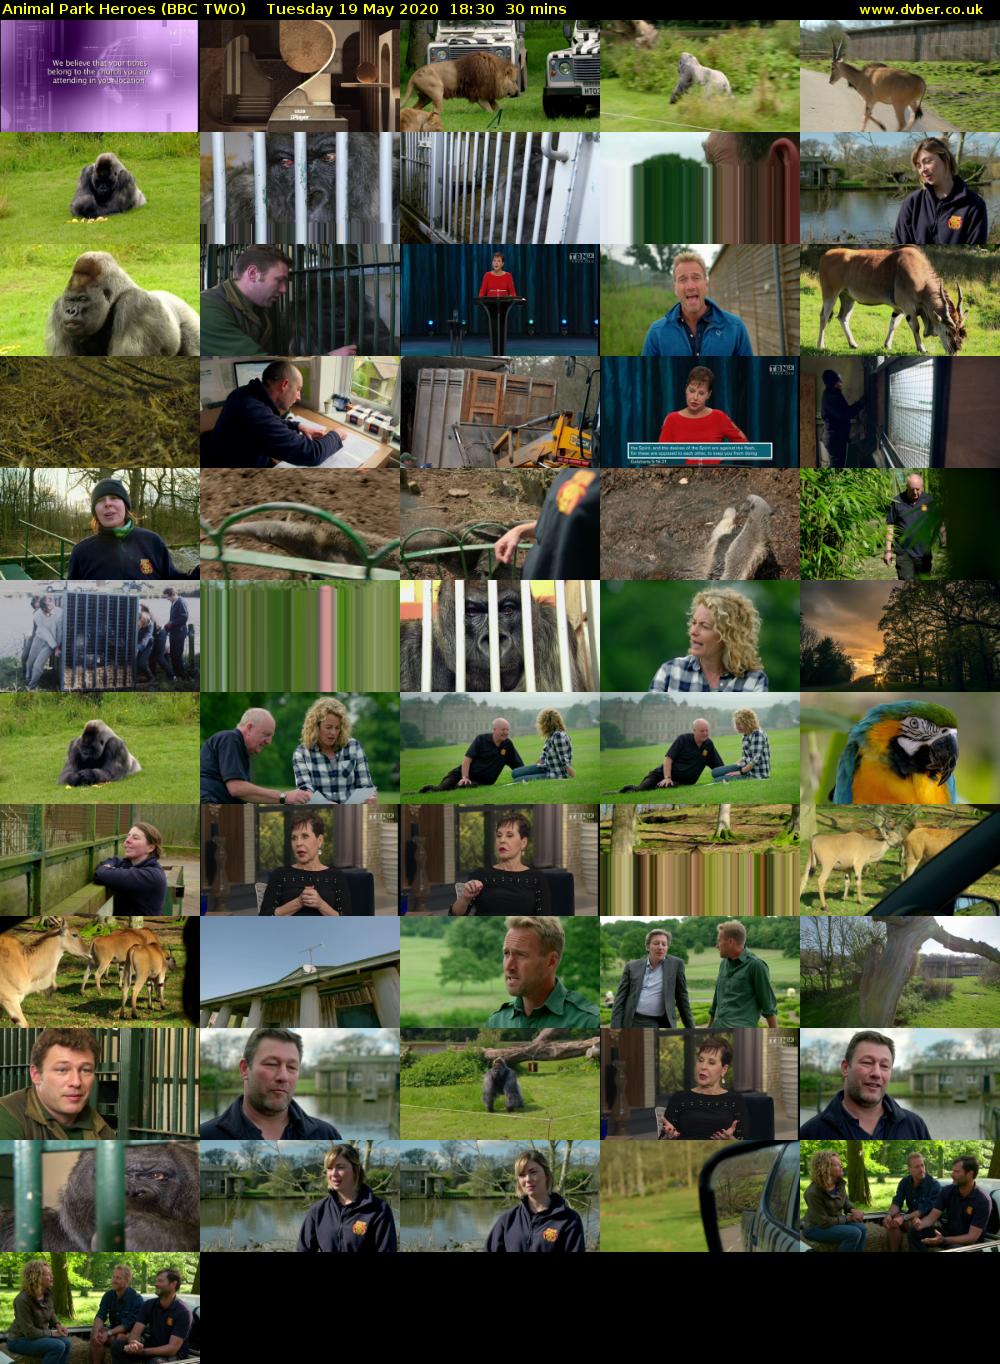 Animal Park Heroes (BBC TWO) Tuesday 19 May 2020 18:30 - 19:00